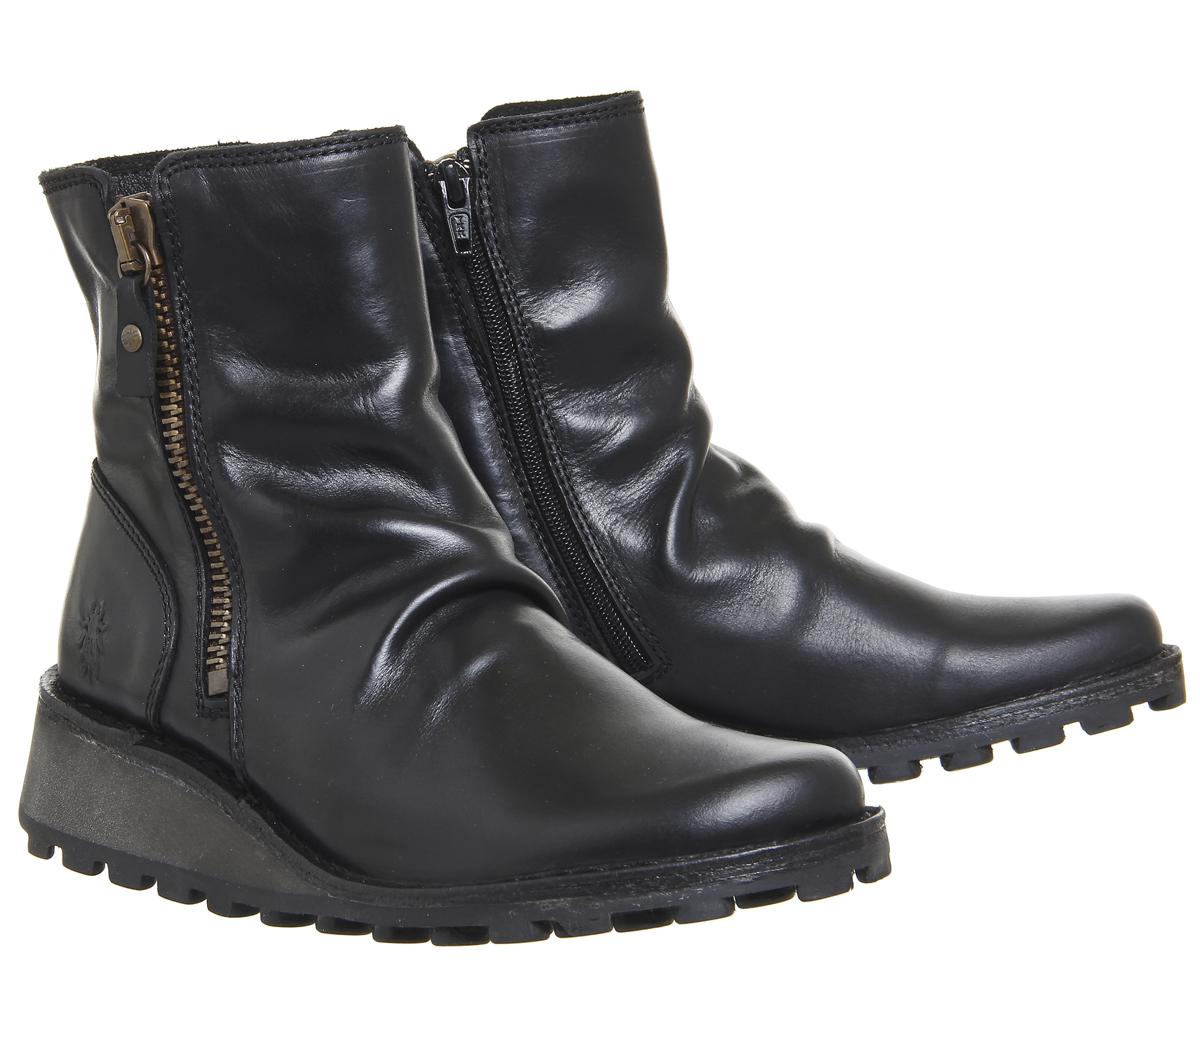 Fly London Leather Mon Zip Boots in Black - Lyst